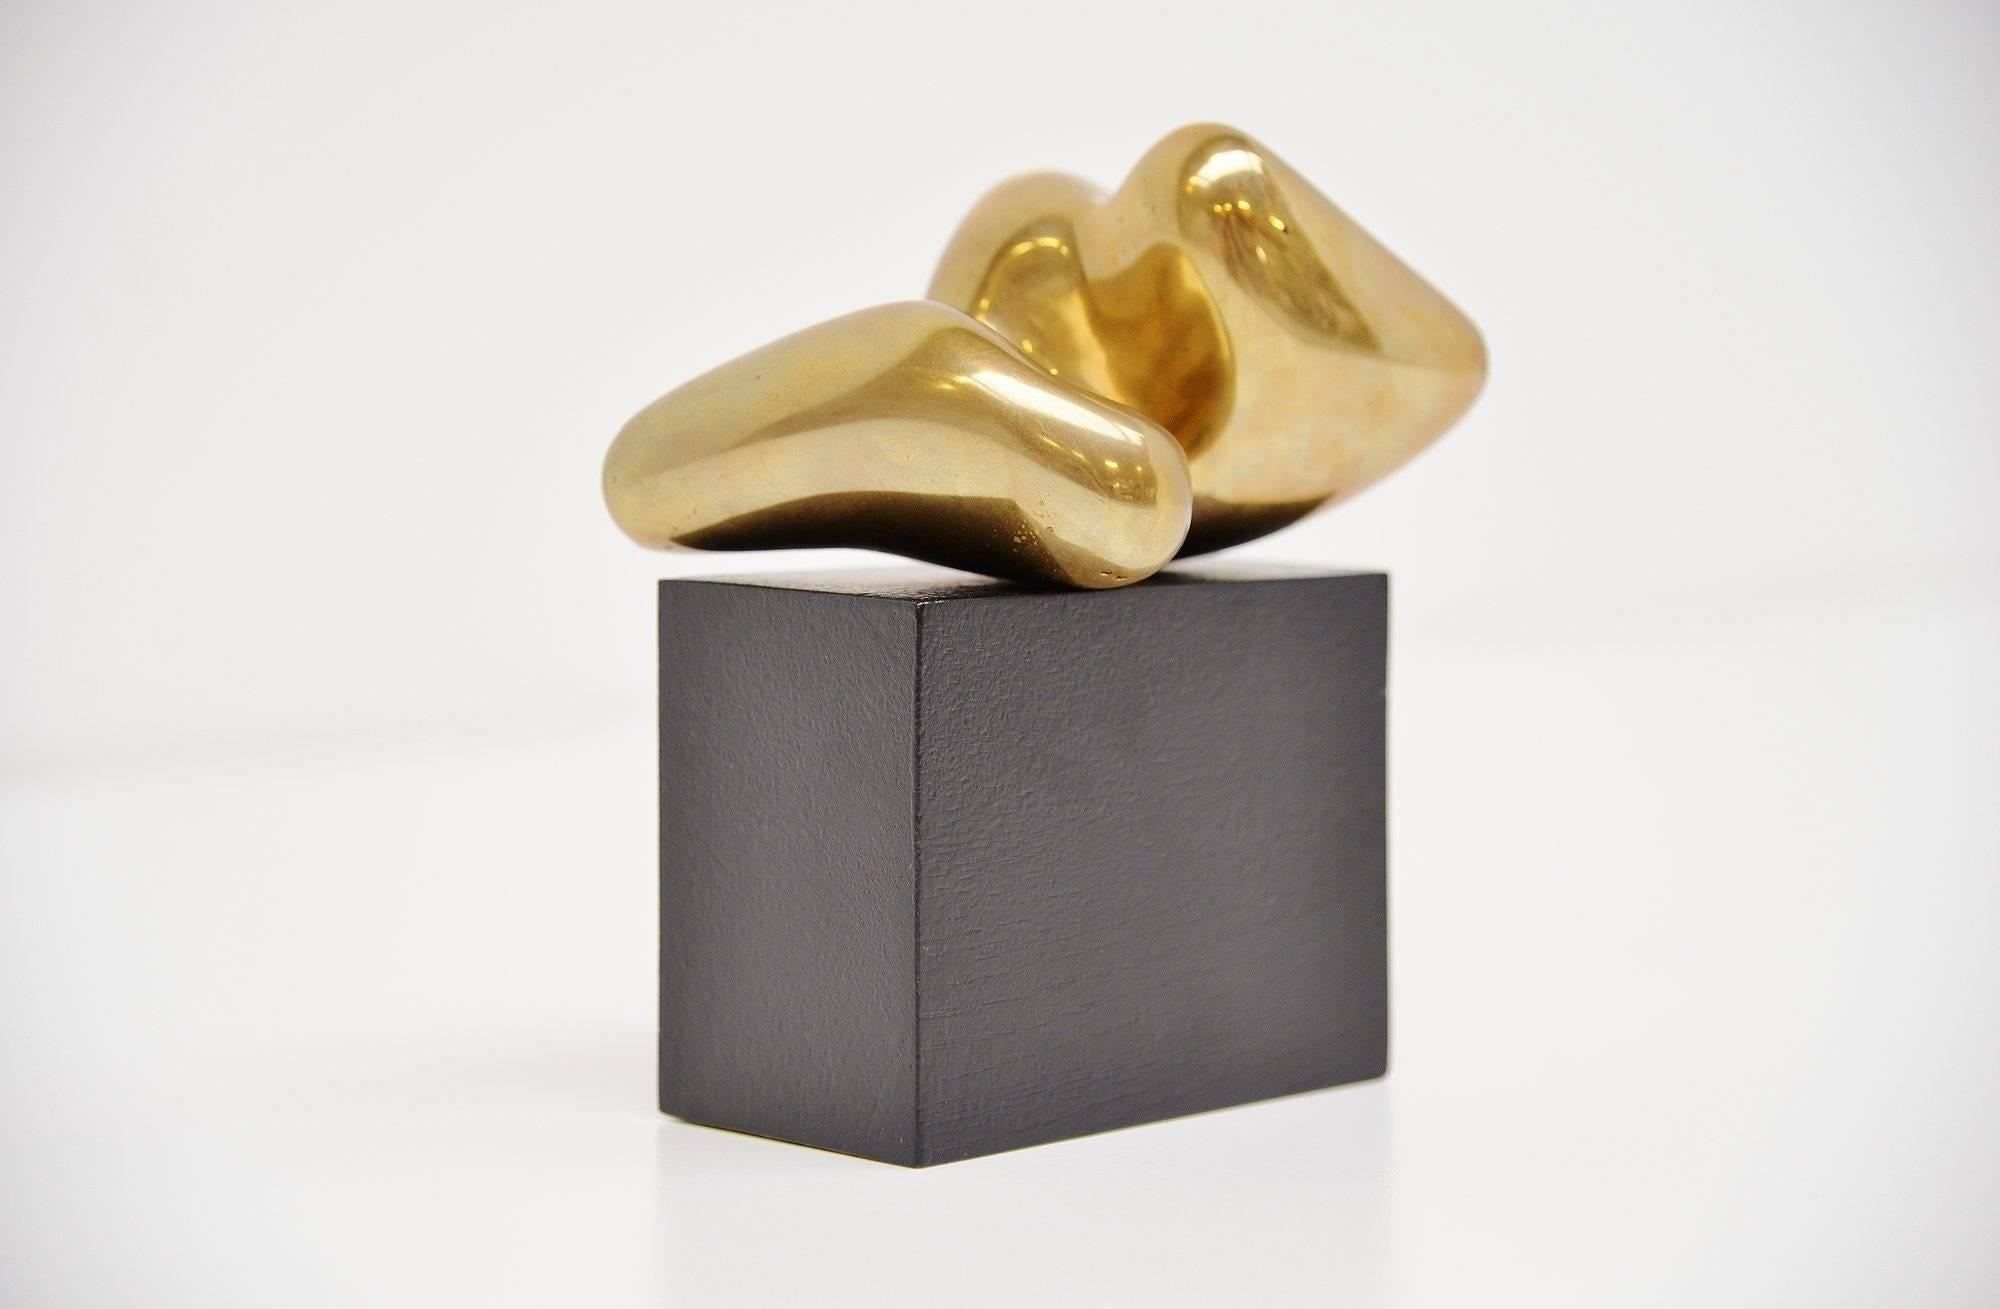 Beautiful crafted bronze sculpture made by Fons Schobbers, Venlo Holland, 1975. Craftmanship, sensuality, vitality and movement dominates the work of Fons Schobbers. He has a preference for powerful, abstract shapes inspired by nature in general and